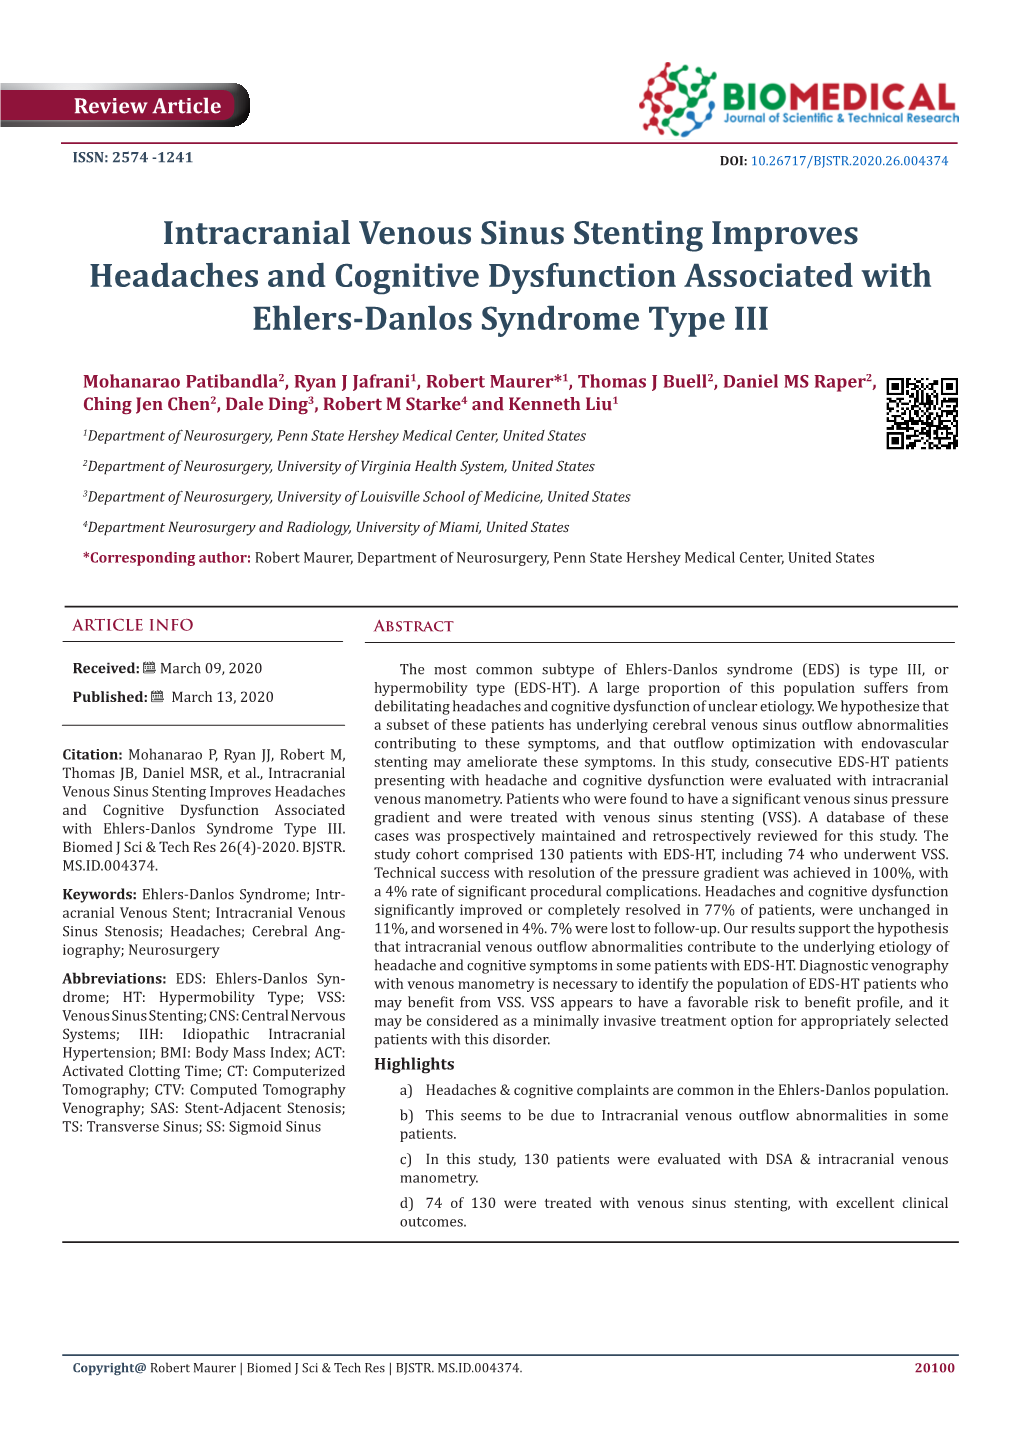 Intracranial Venous Sinus Stenting Improves Headaches and Cognitive Dysfunction Associated with Ehlers-Danlos Syndrome Type III